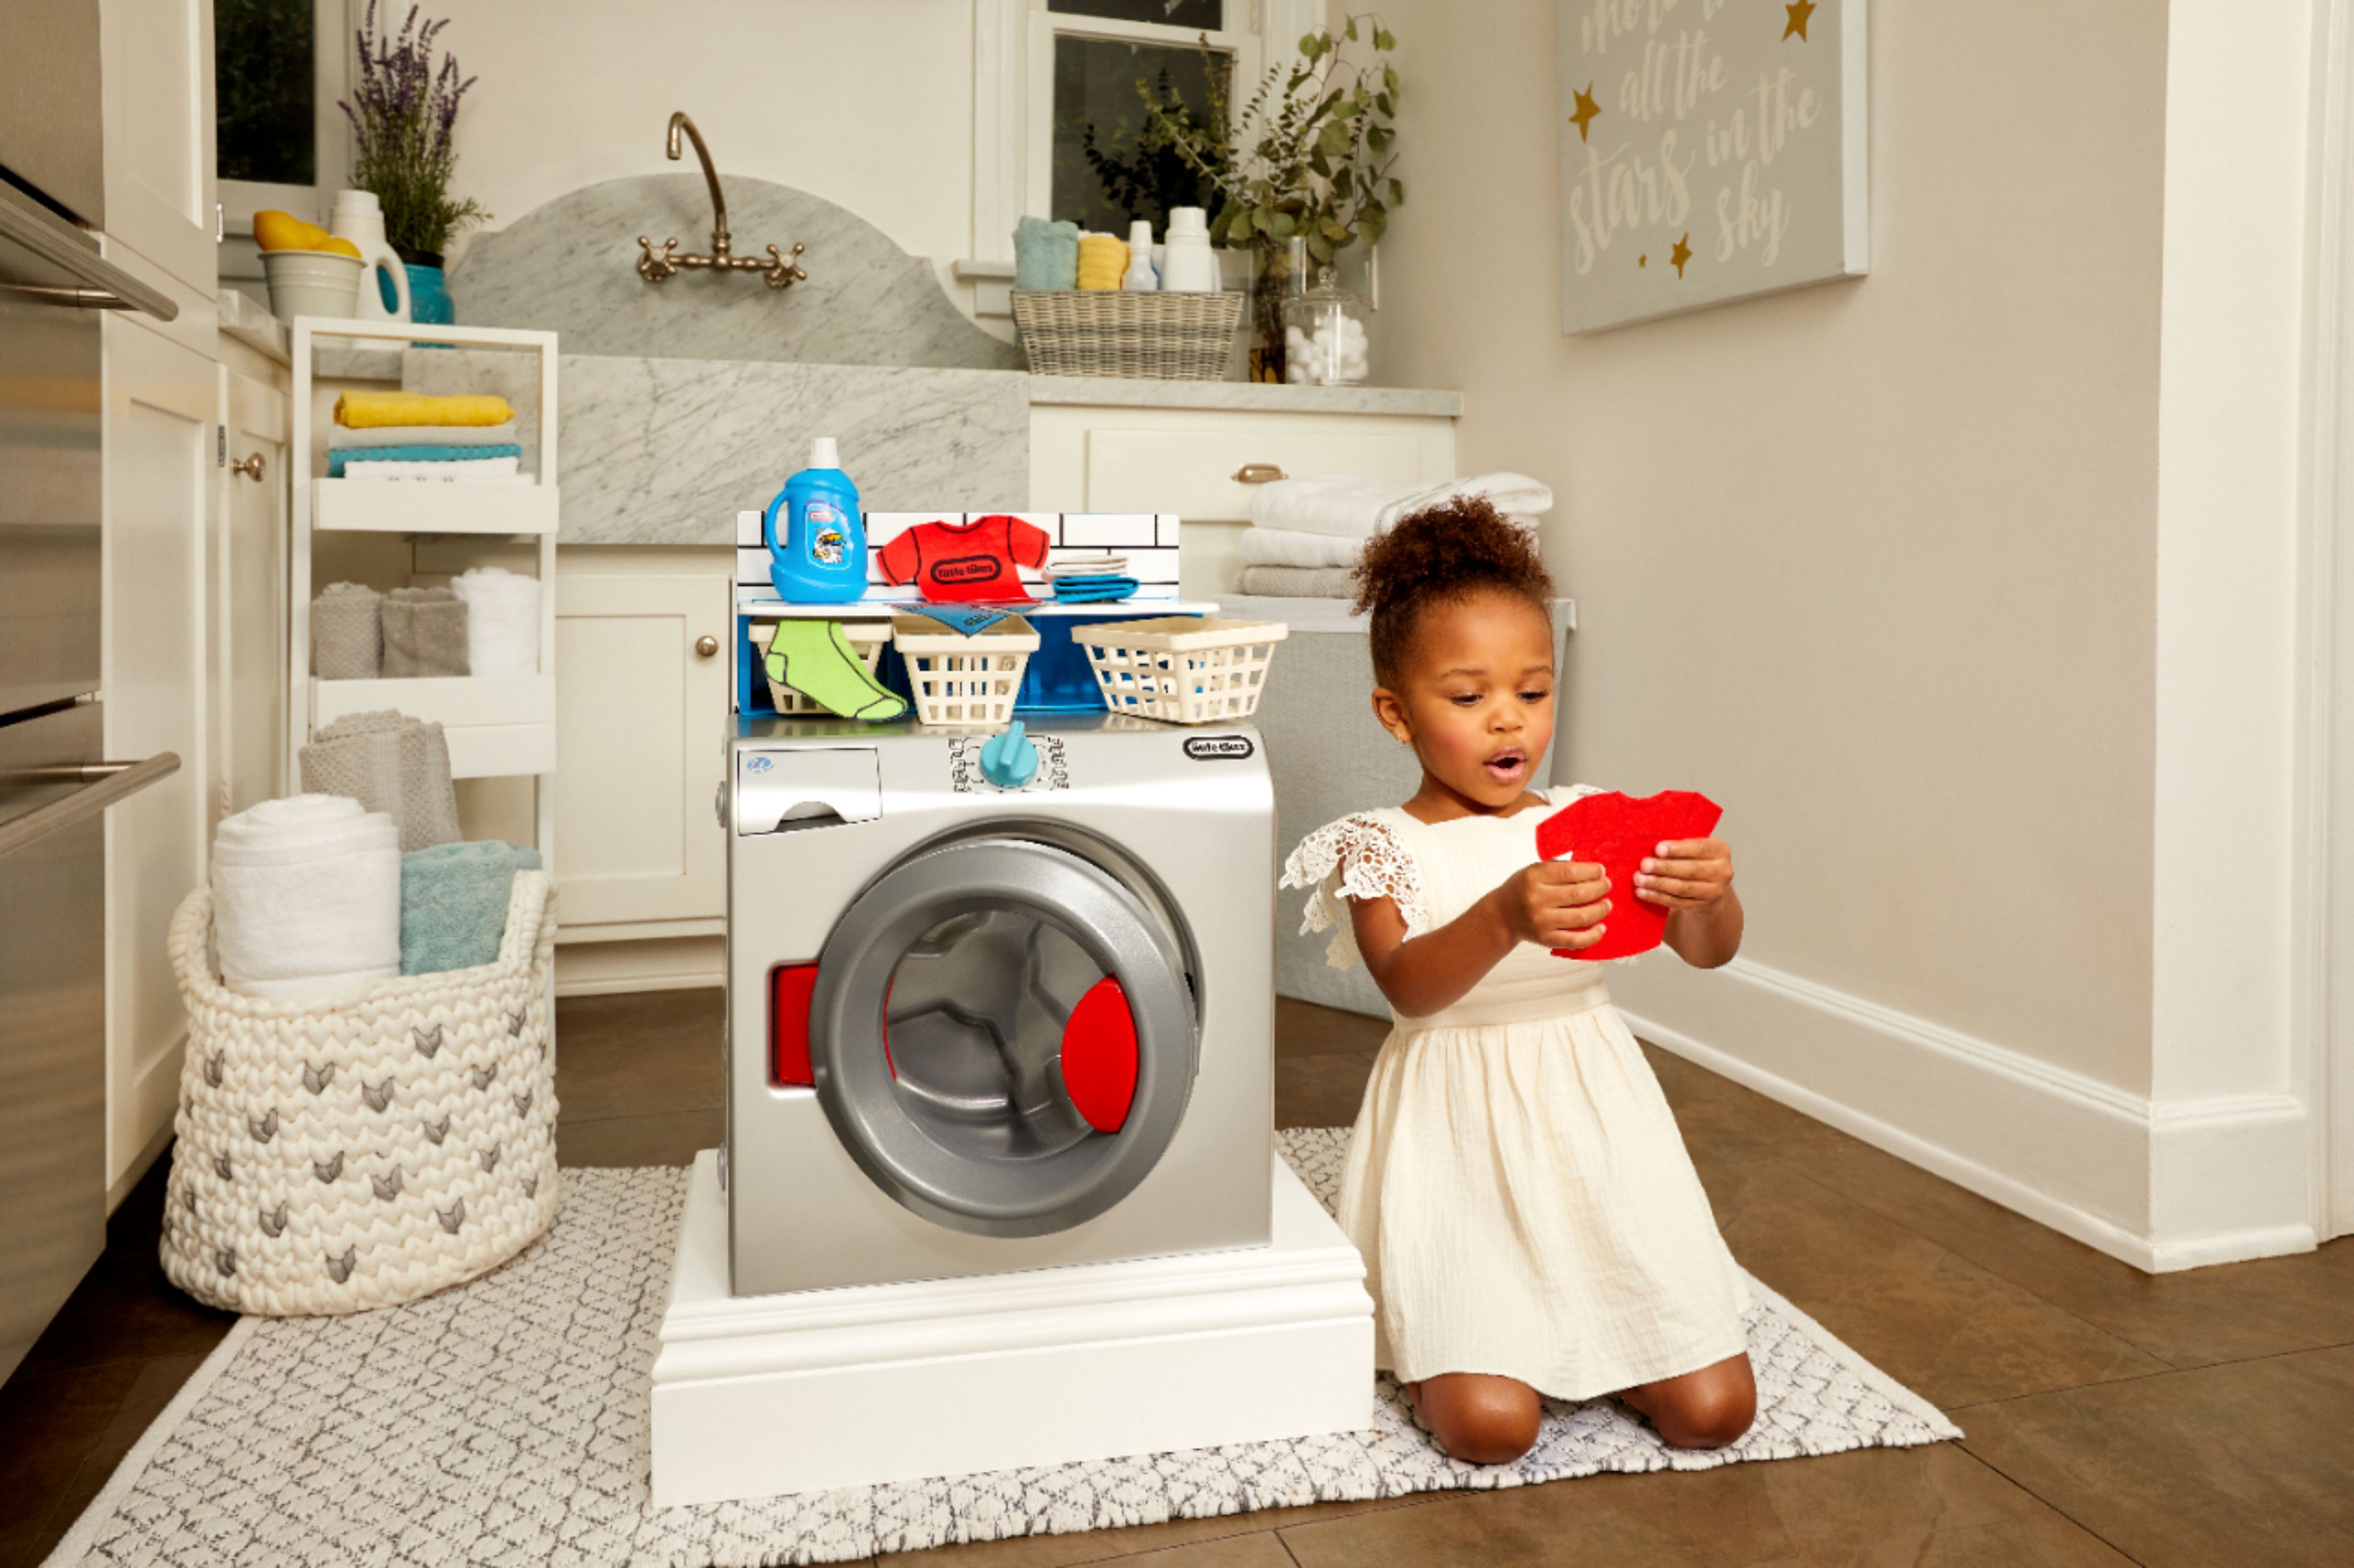 First Washer - Dryer  Little Tikes – Official Little Tikes Website